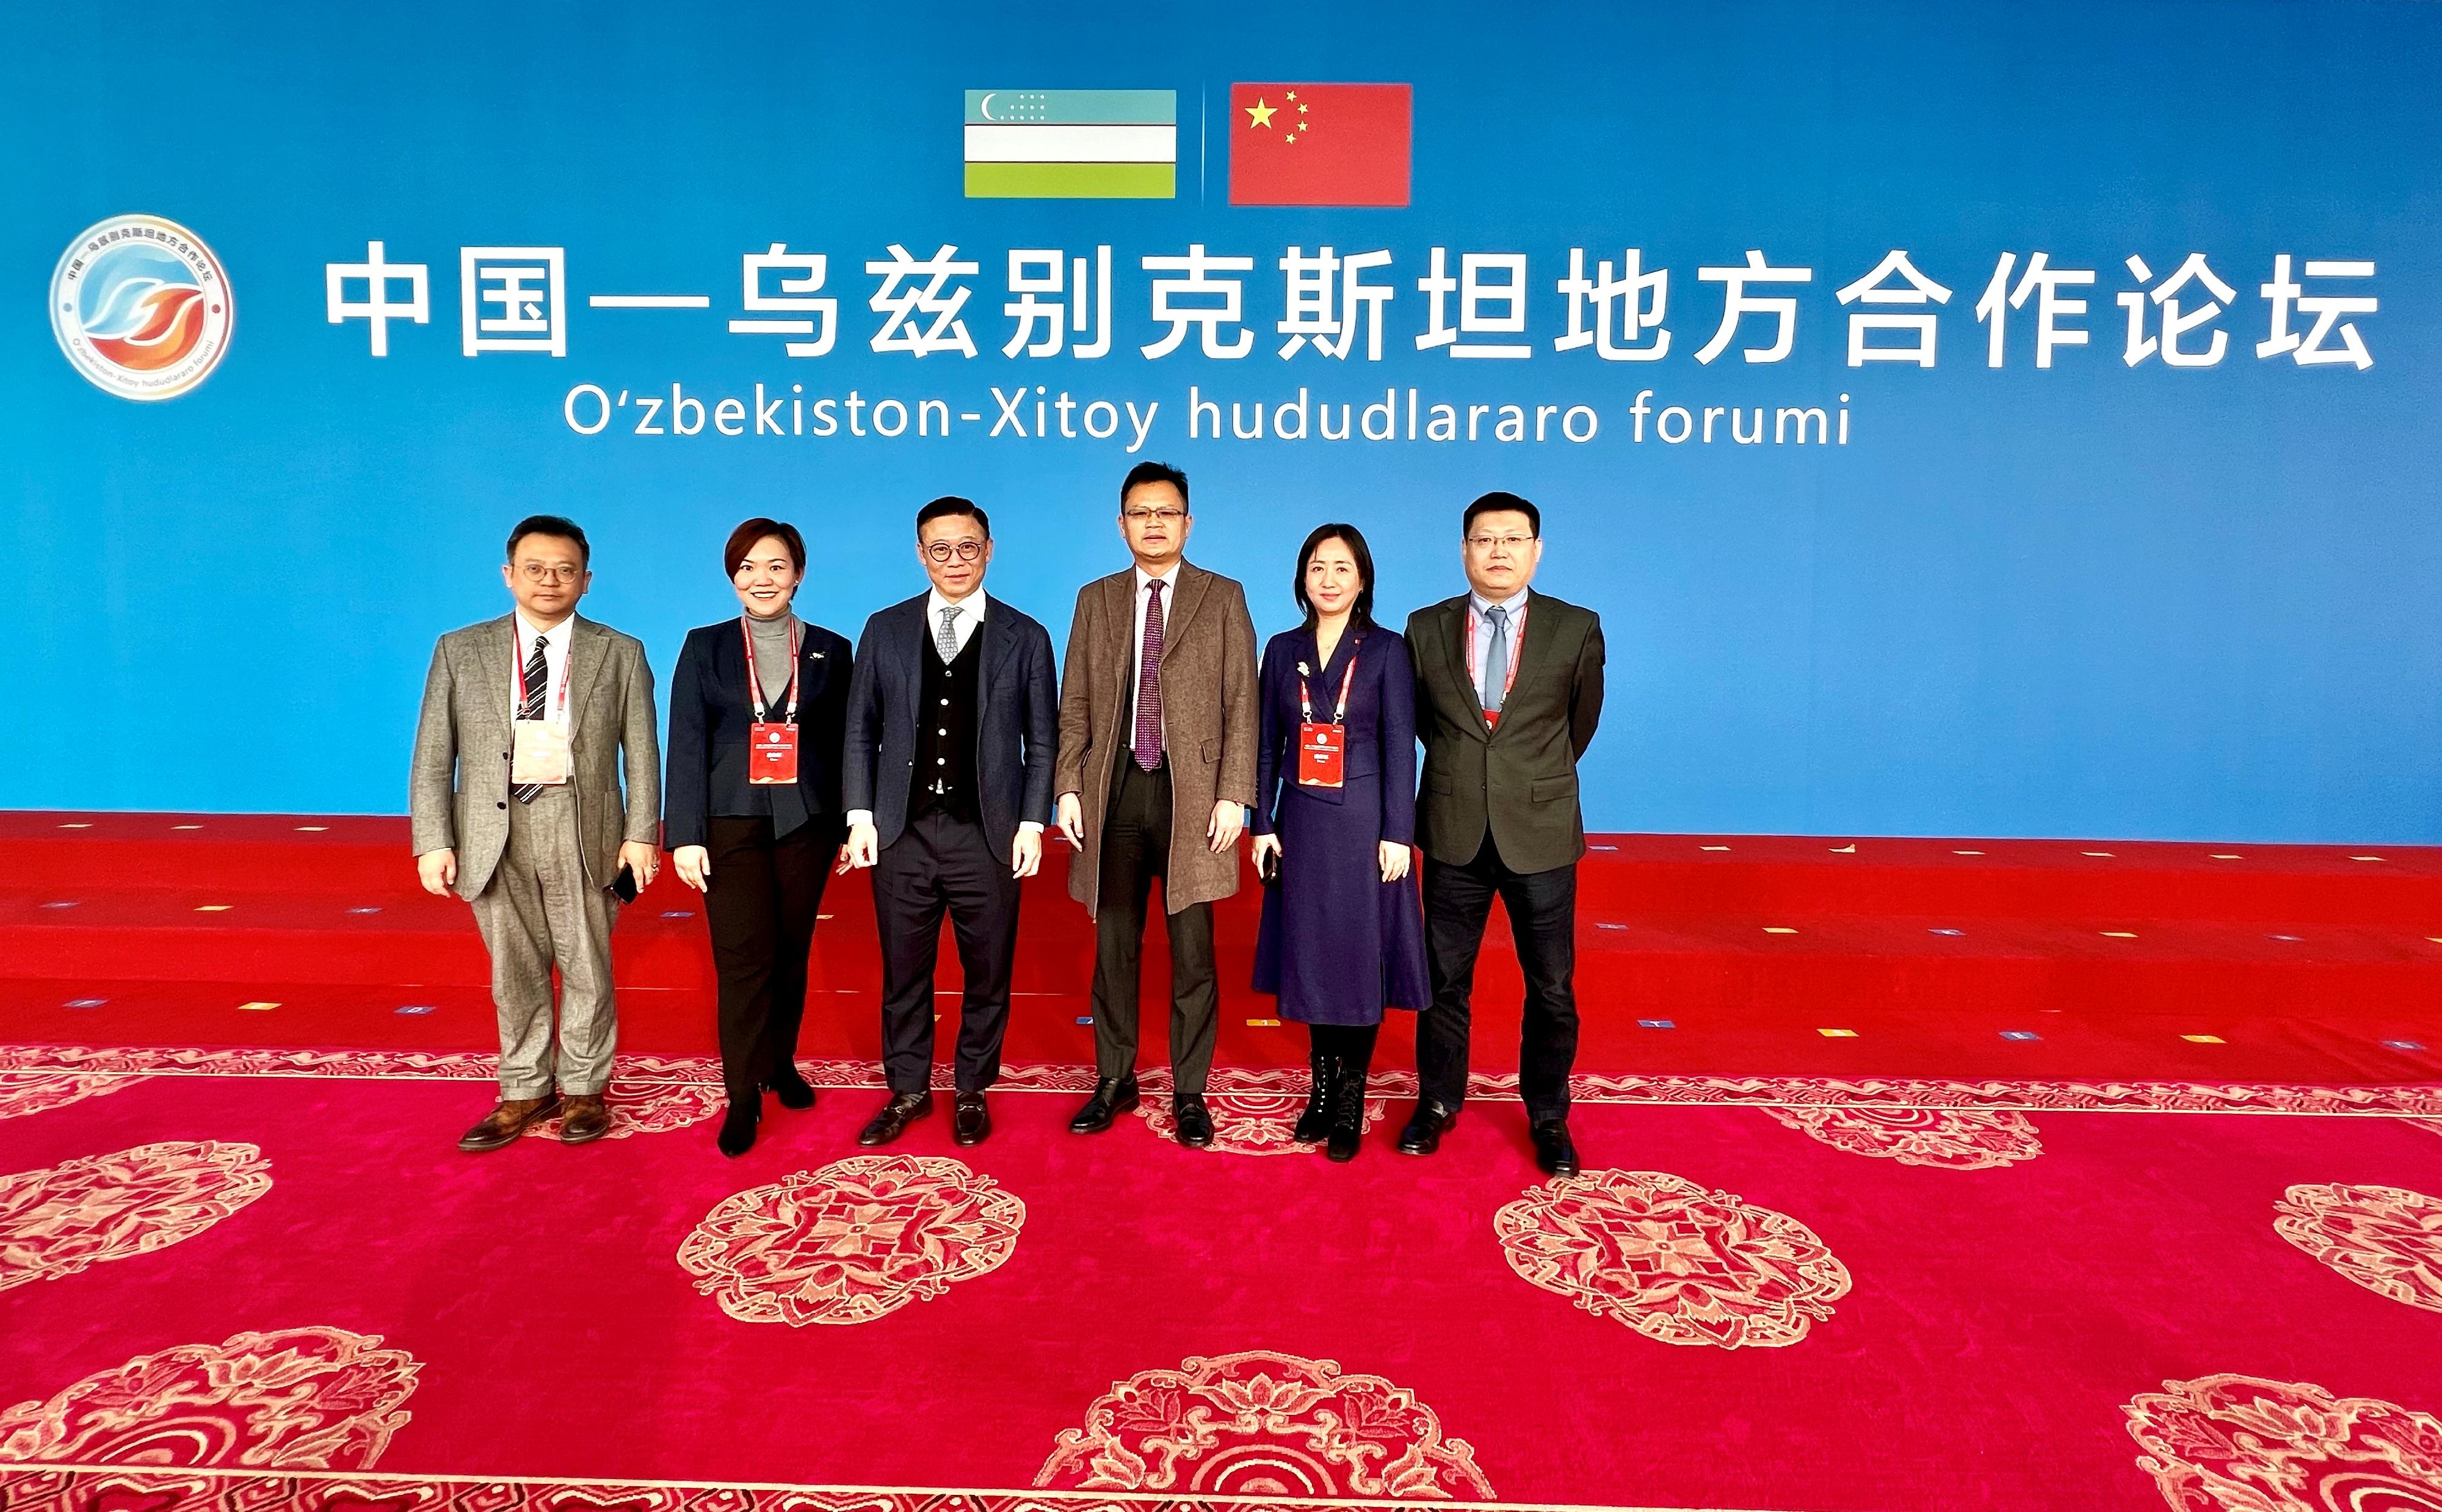 The Deputy Secretary for Justice, Mr Cheung Kwok-kwan, led a Hong Kong Special Administrative Region delegation to participate in a forum on China-Uzbekistan co-operation in Urumqi, Xinjiang today (January 22). Photo shows Mr Cheung (third left) and members of the delegation at the forum.
